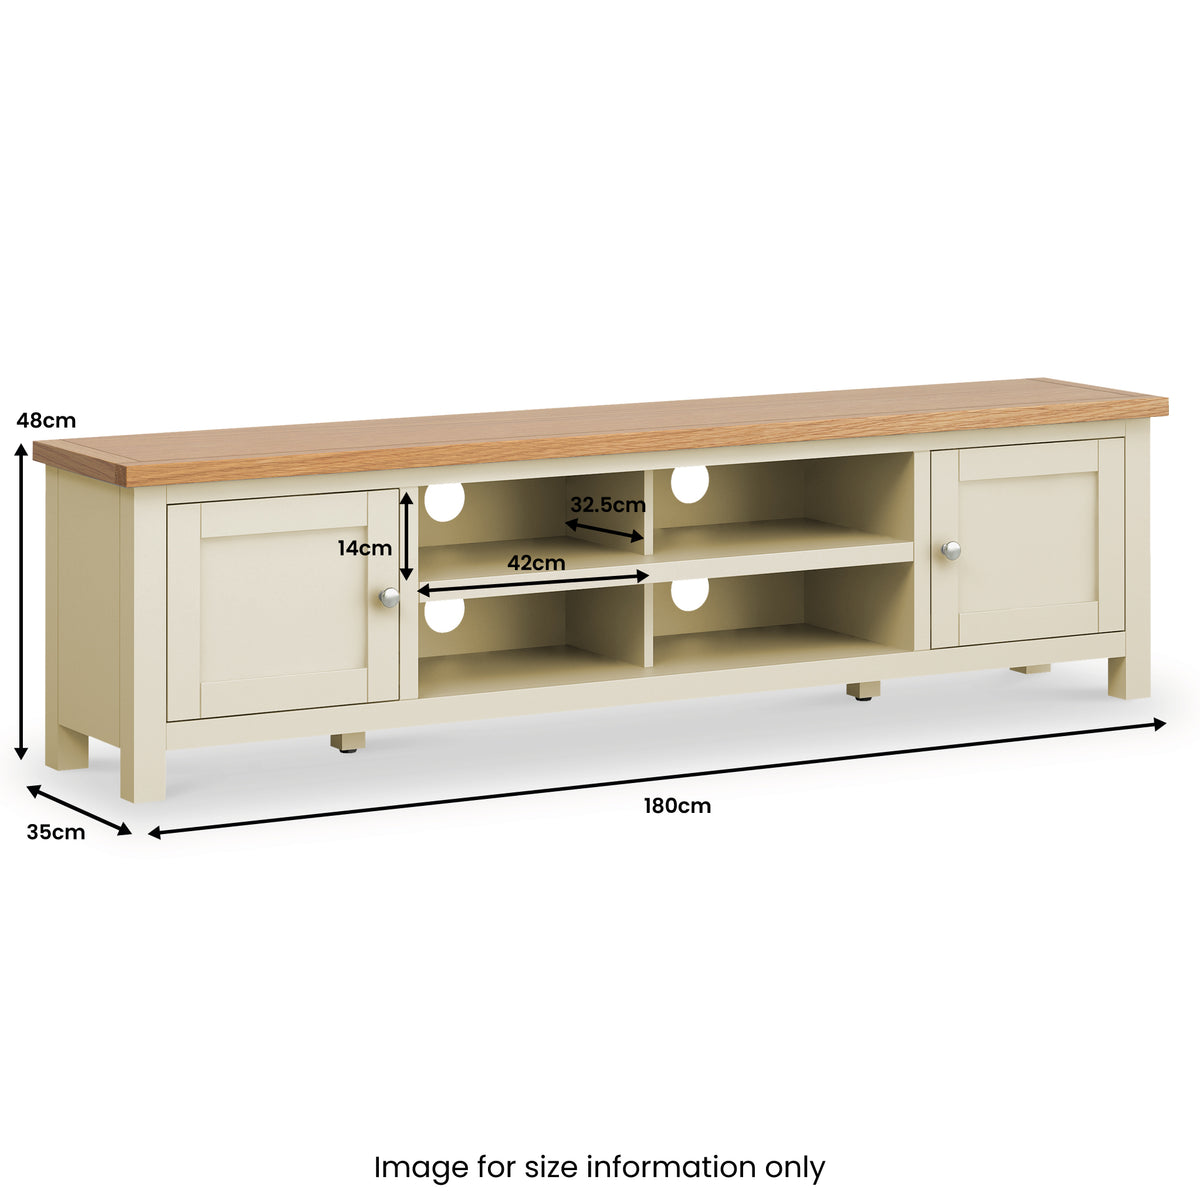 Farrow 180cm Extra Wide TV Stand dimensions